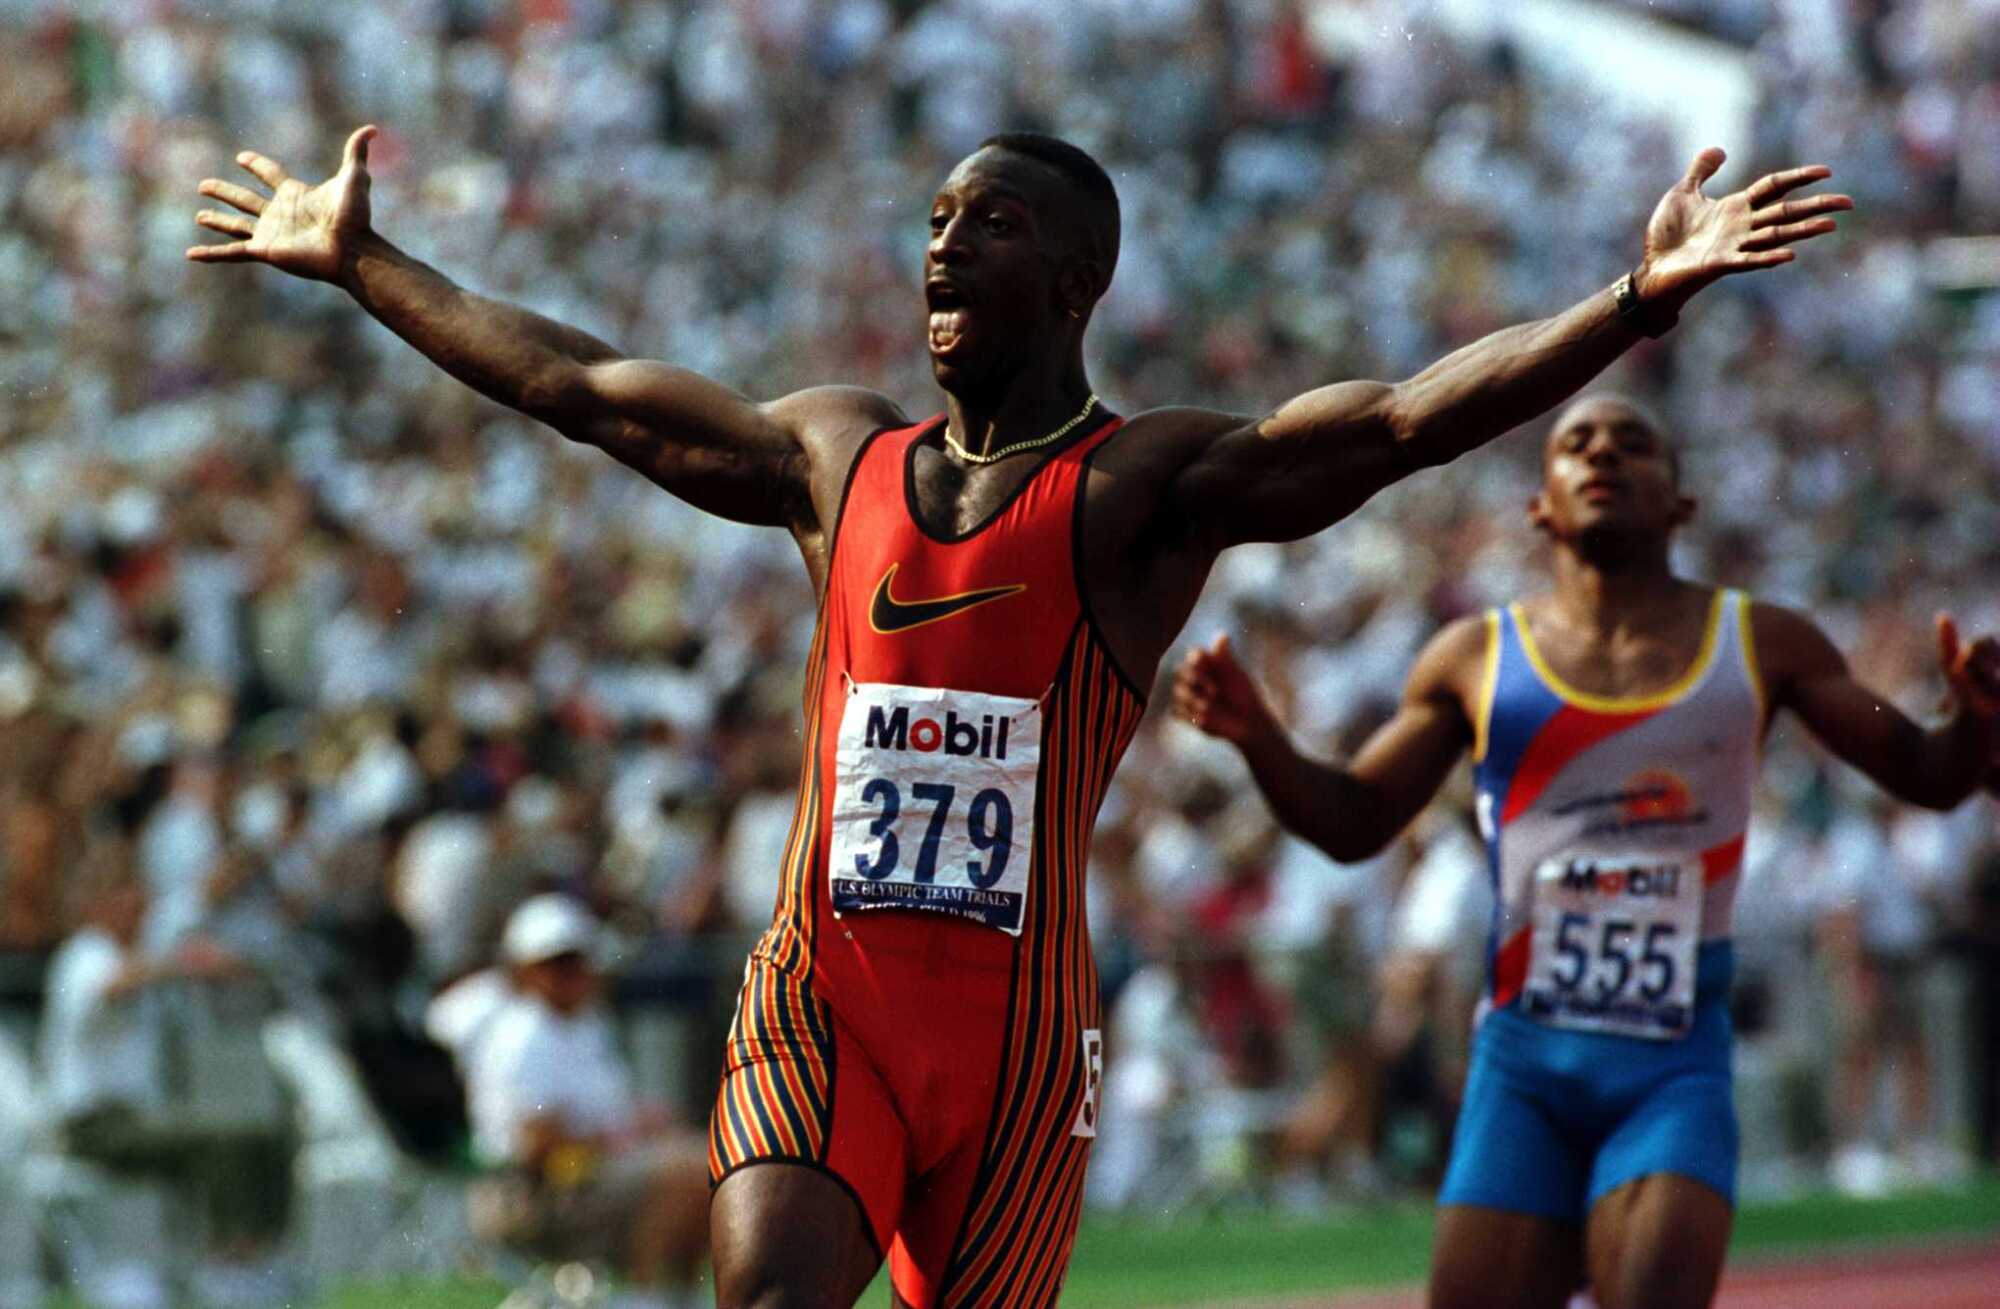 Michael Johnson reacts to setting a new World record in the men's 200 meters 